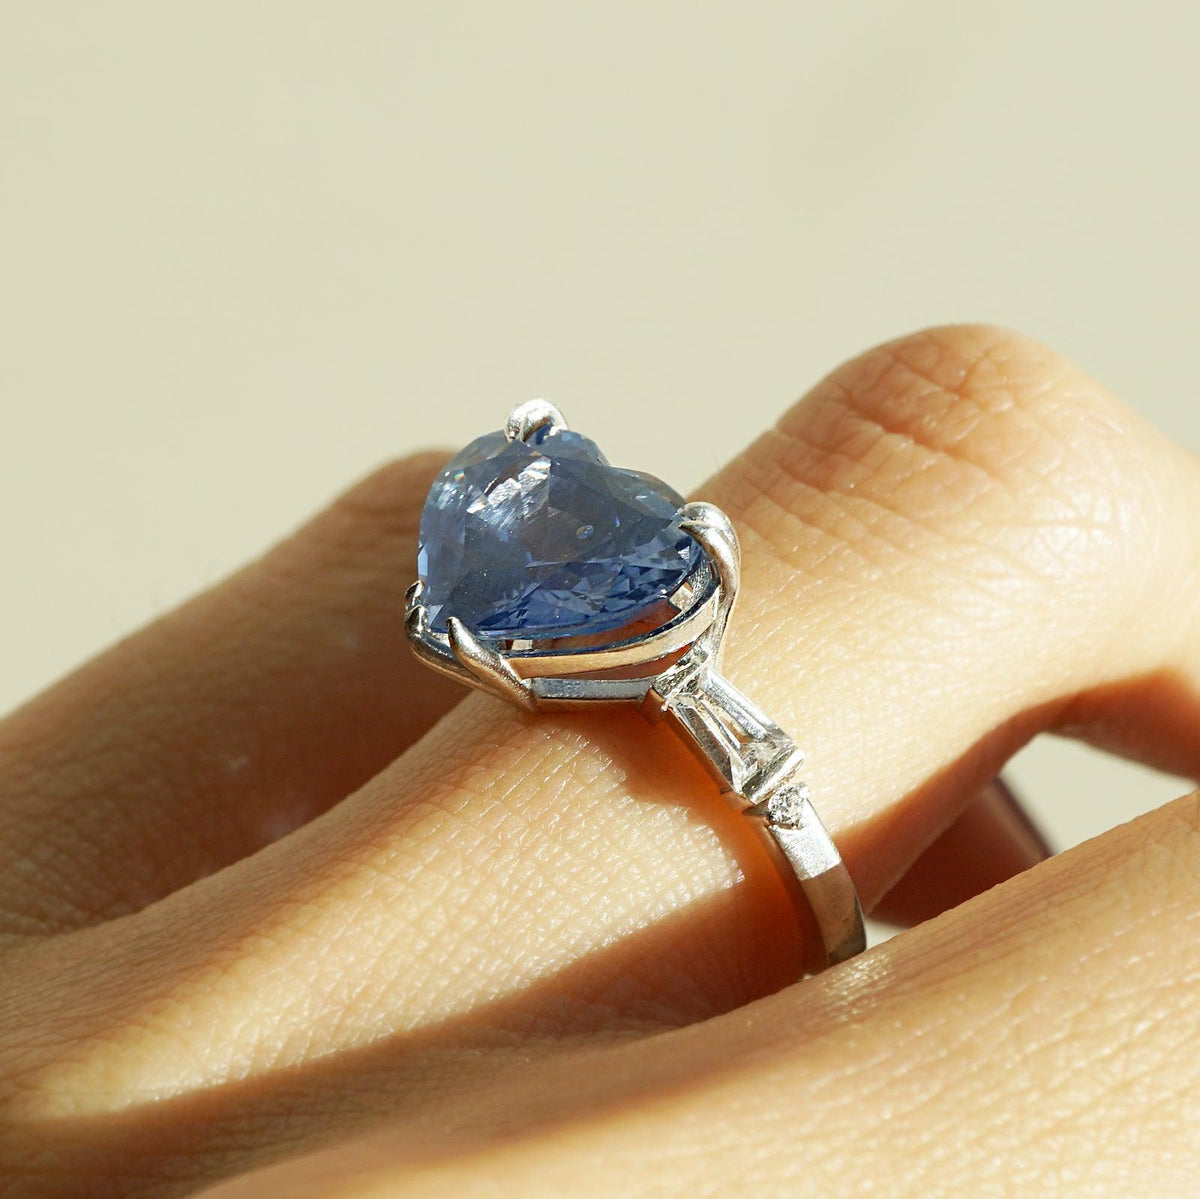 One Of A Kind: Heart Of The Ocean Sapphire Ring - Tippy Taste Jewelry